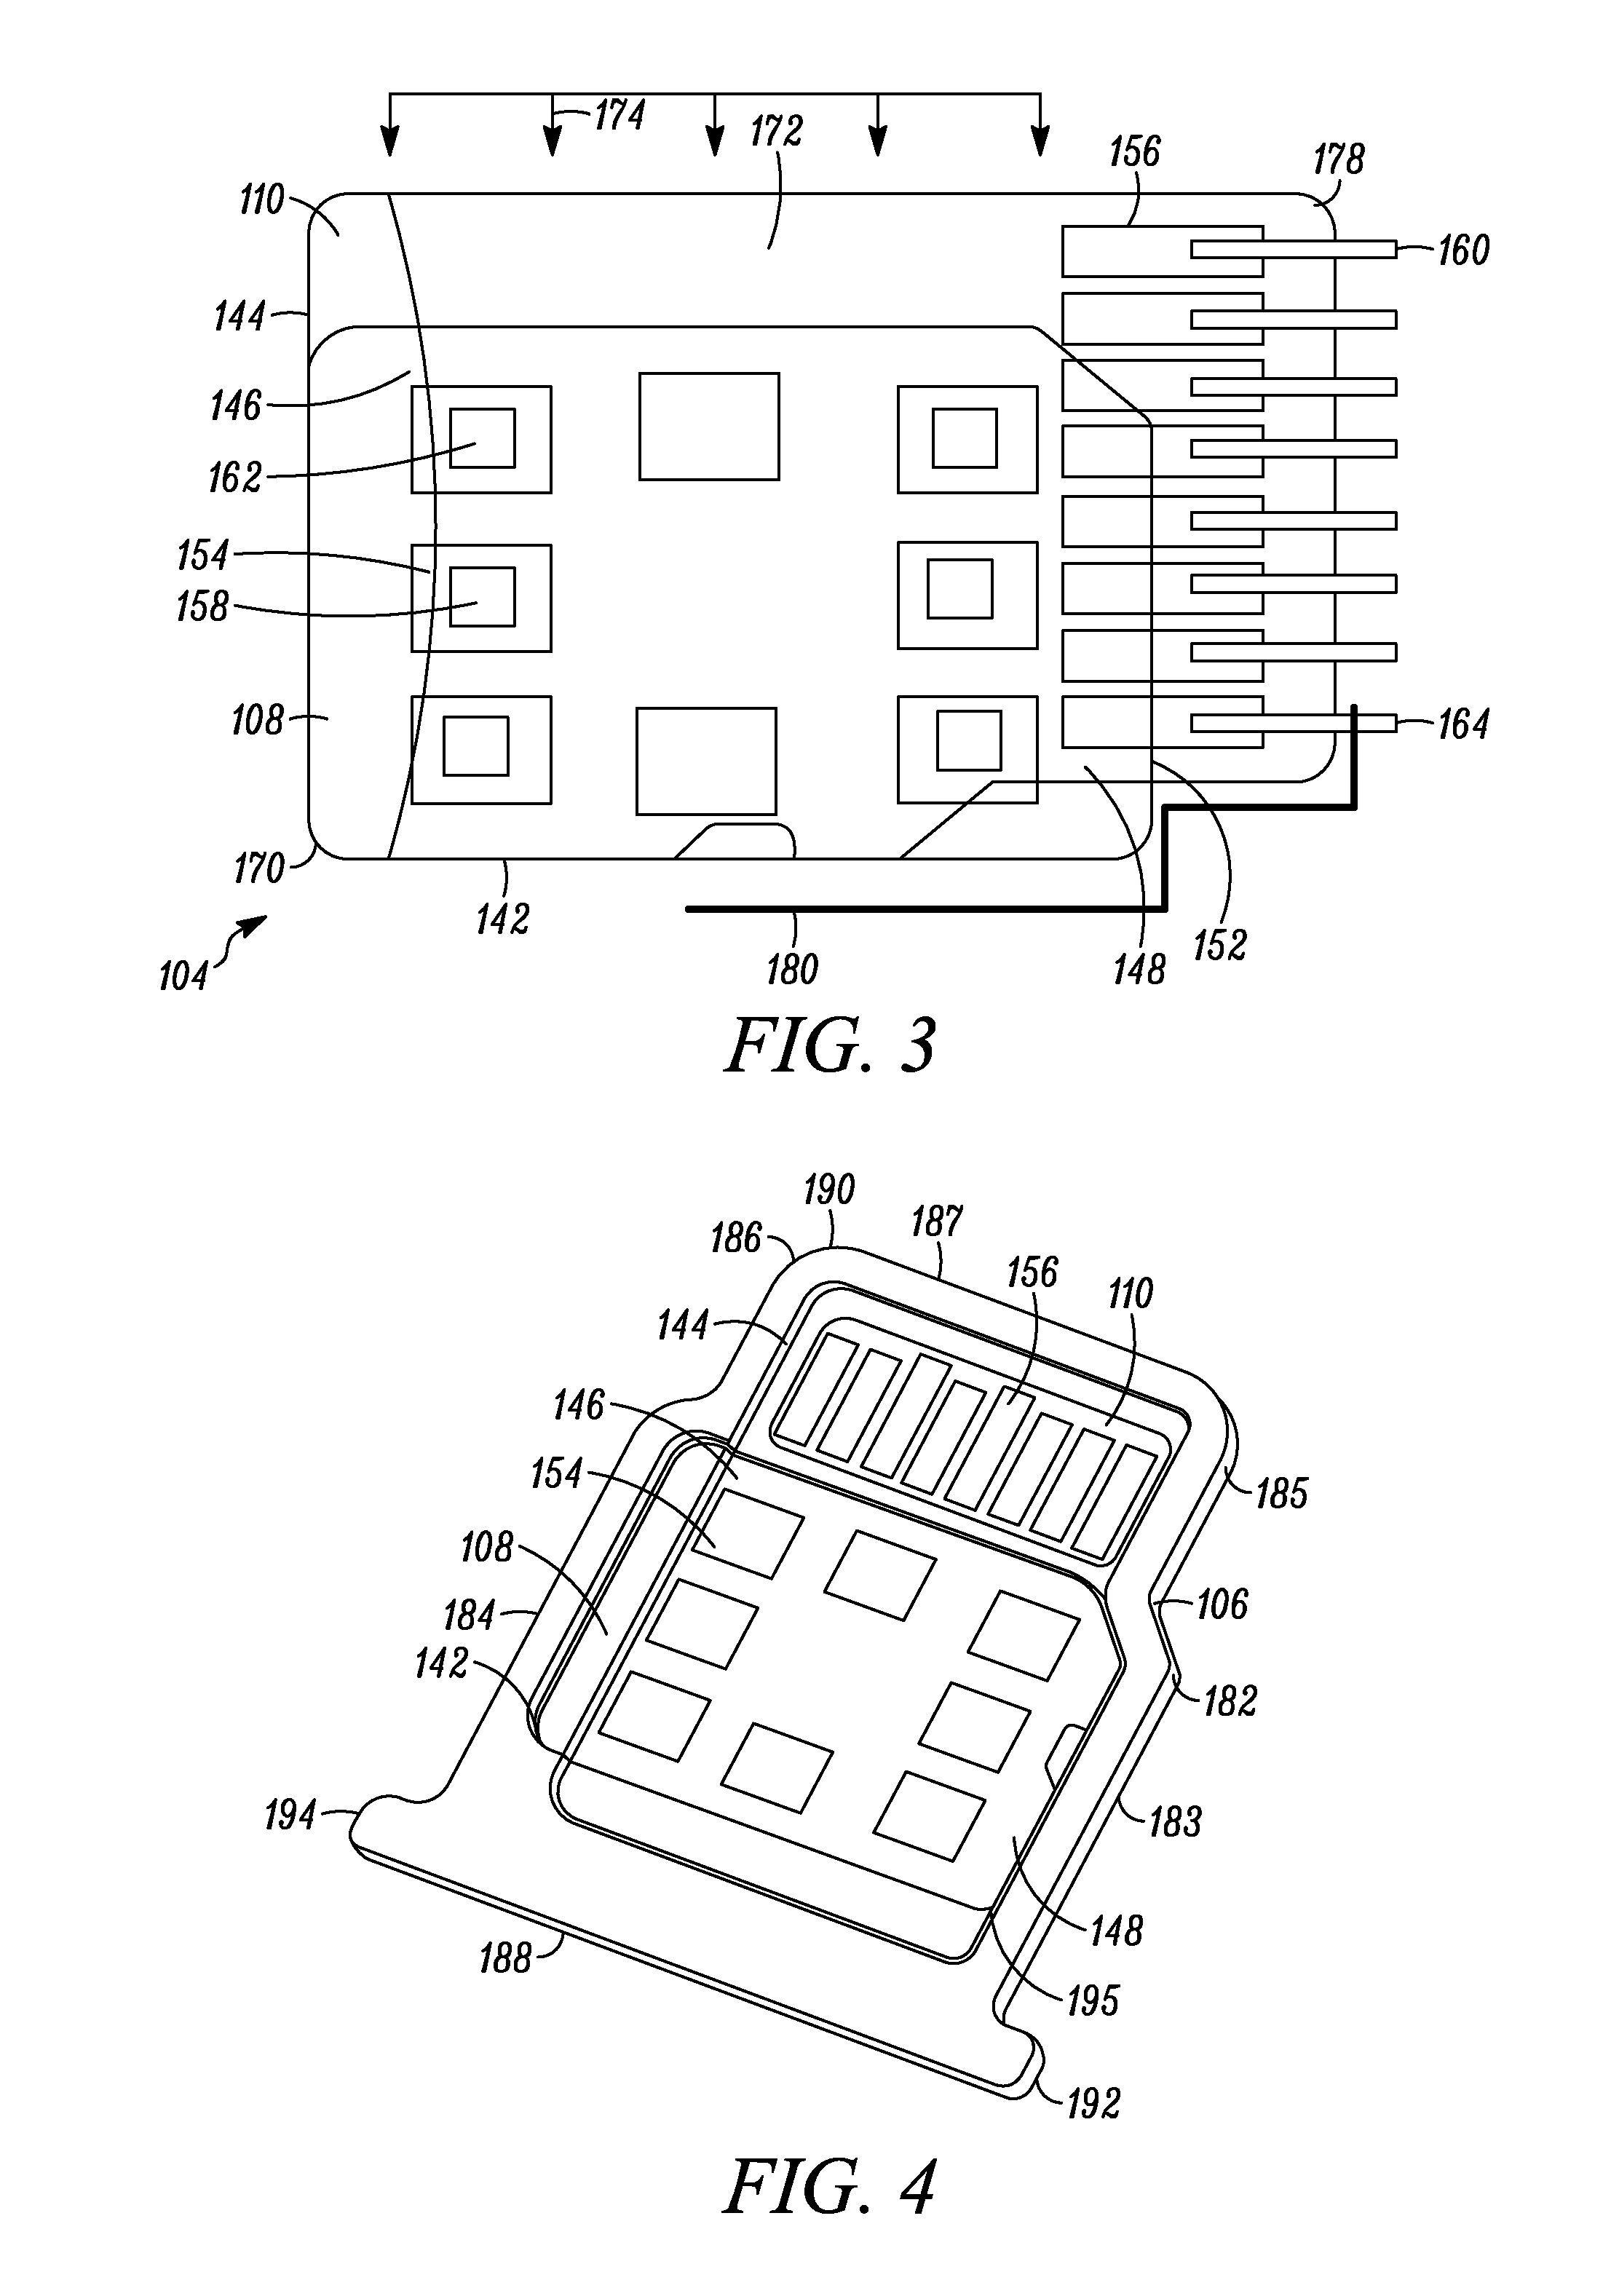 Electronic connector capable of accepting a single subscriber identity mopdule or a memory card